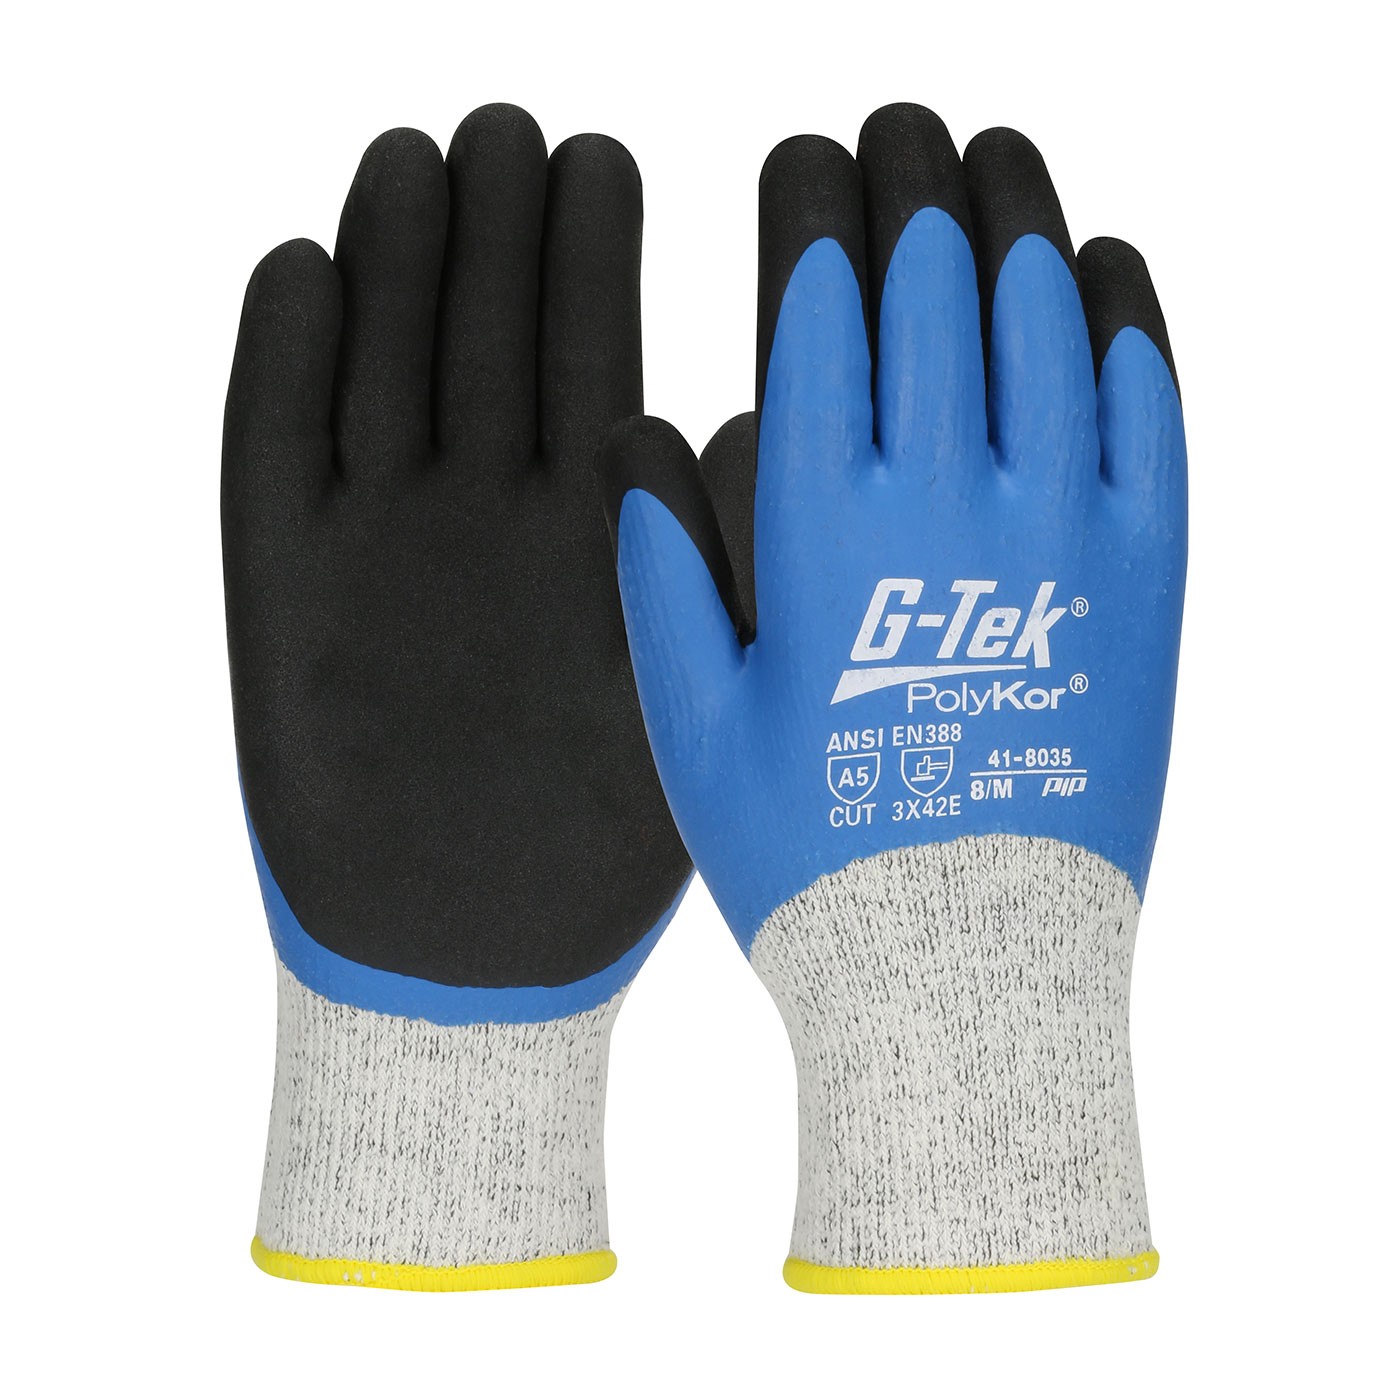 G-Tek® PolyKor® Seamless Knit Single-Layer PolyKor® / Acrylic Blended Glove with Double-Dipped Latex Coated MicroSurface Grip on Full Hand  (#41-8035)